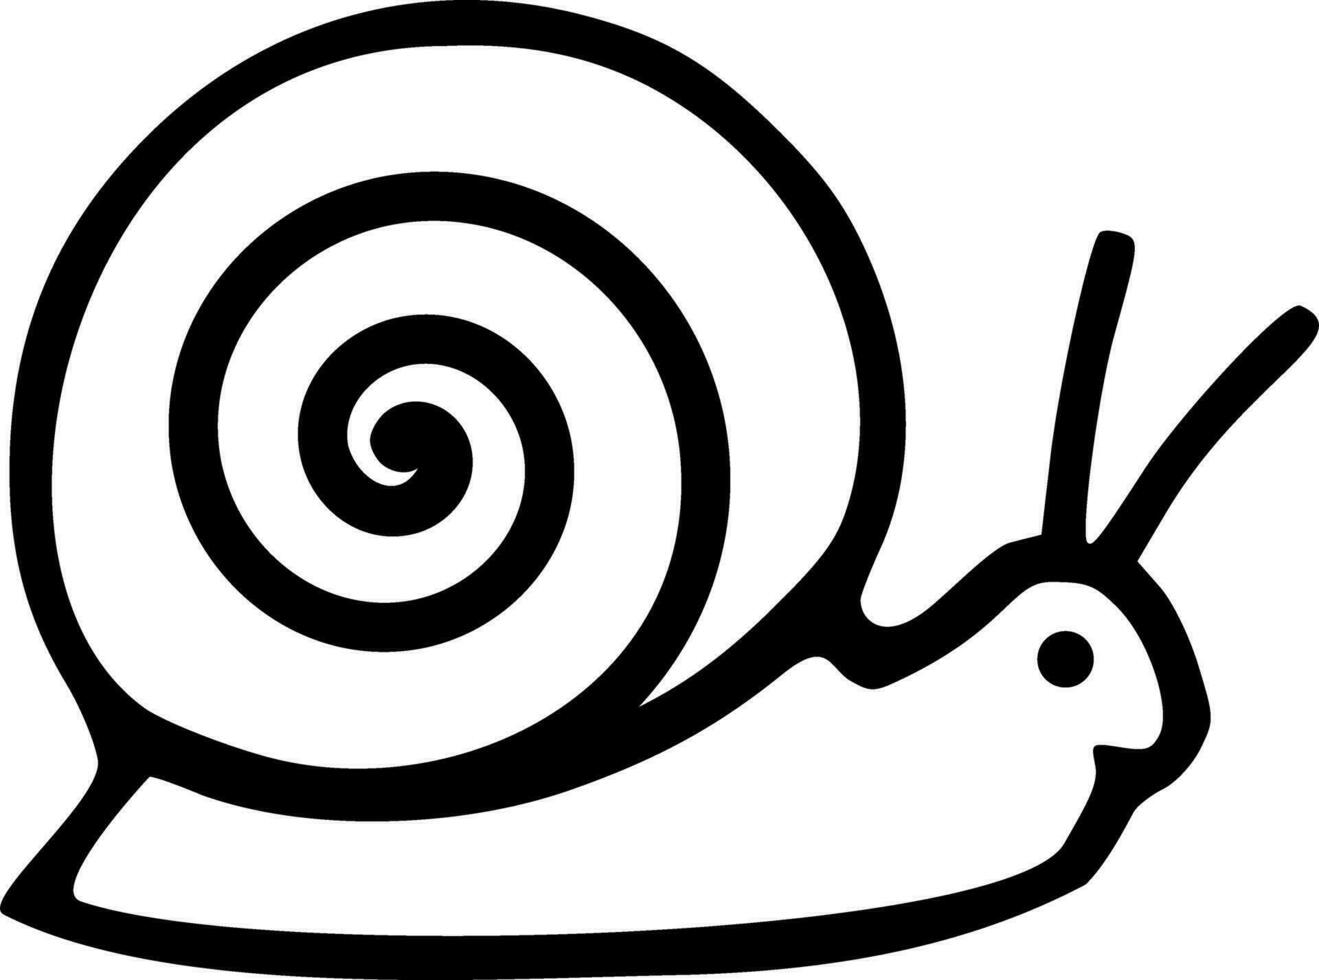 Vector cute snail doodle icon black outlines vector illustration